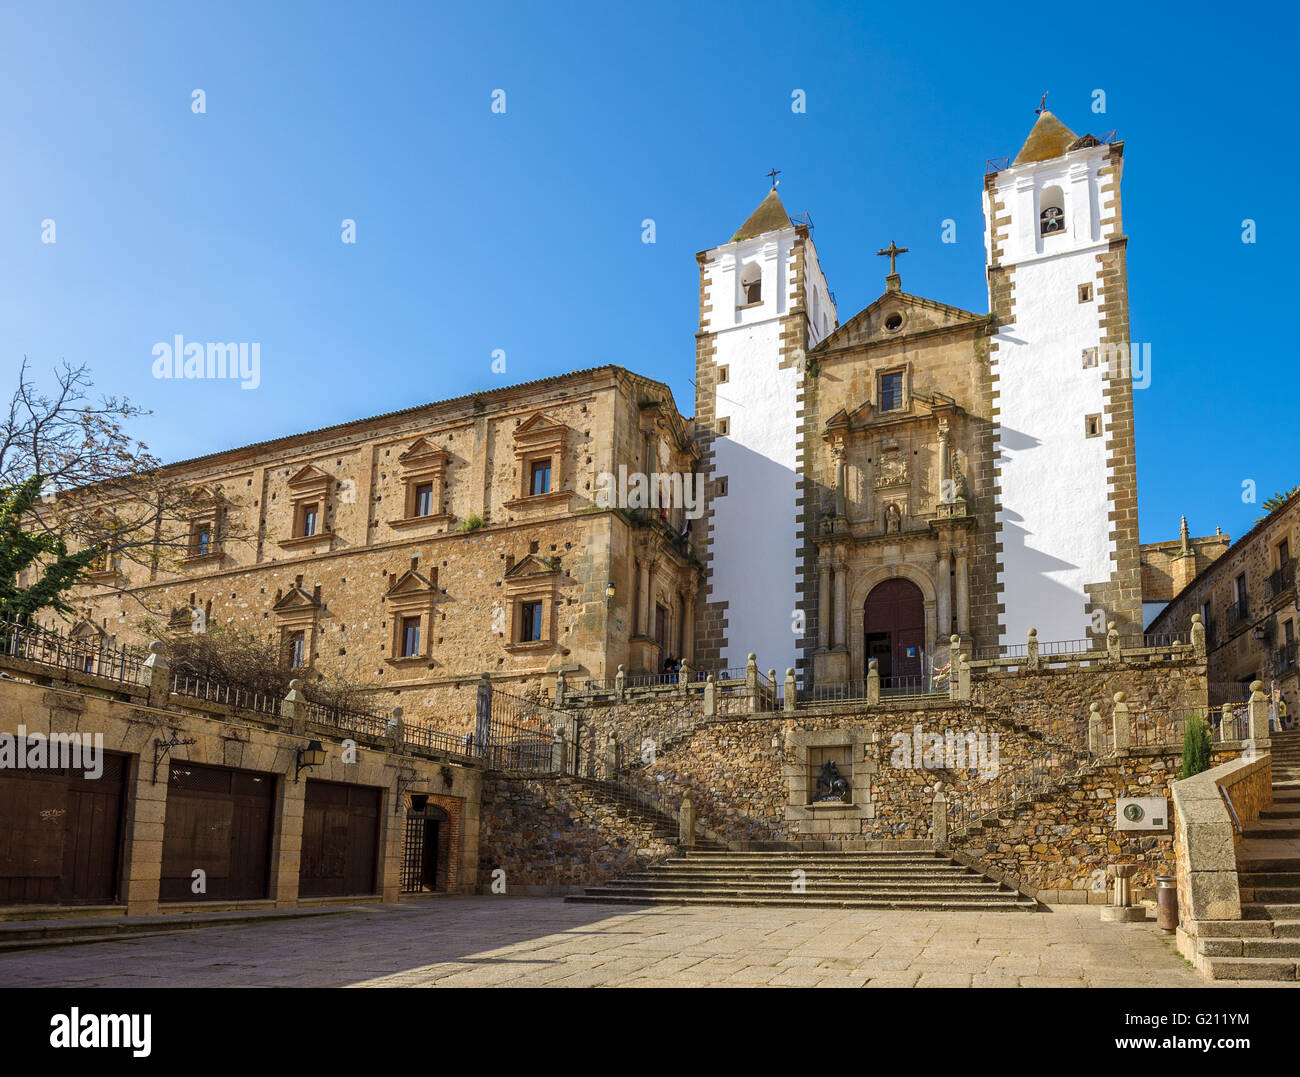 Old town of Caceres, Spain Stock Photo